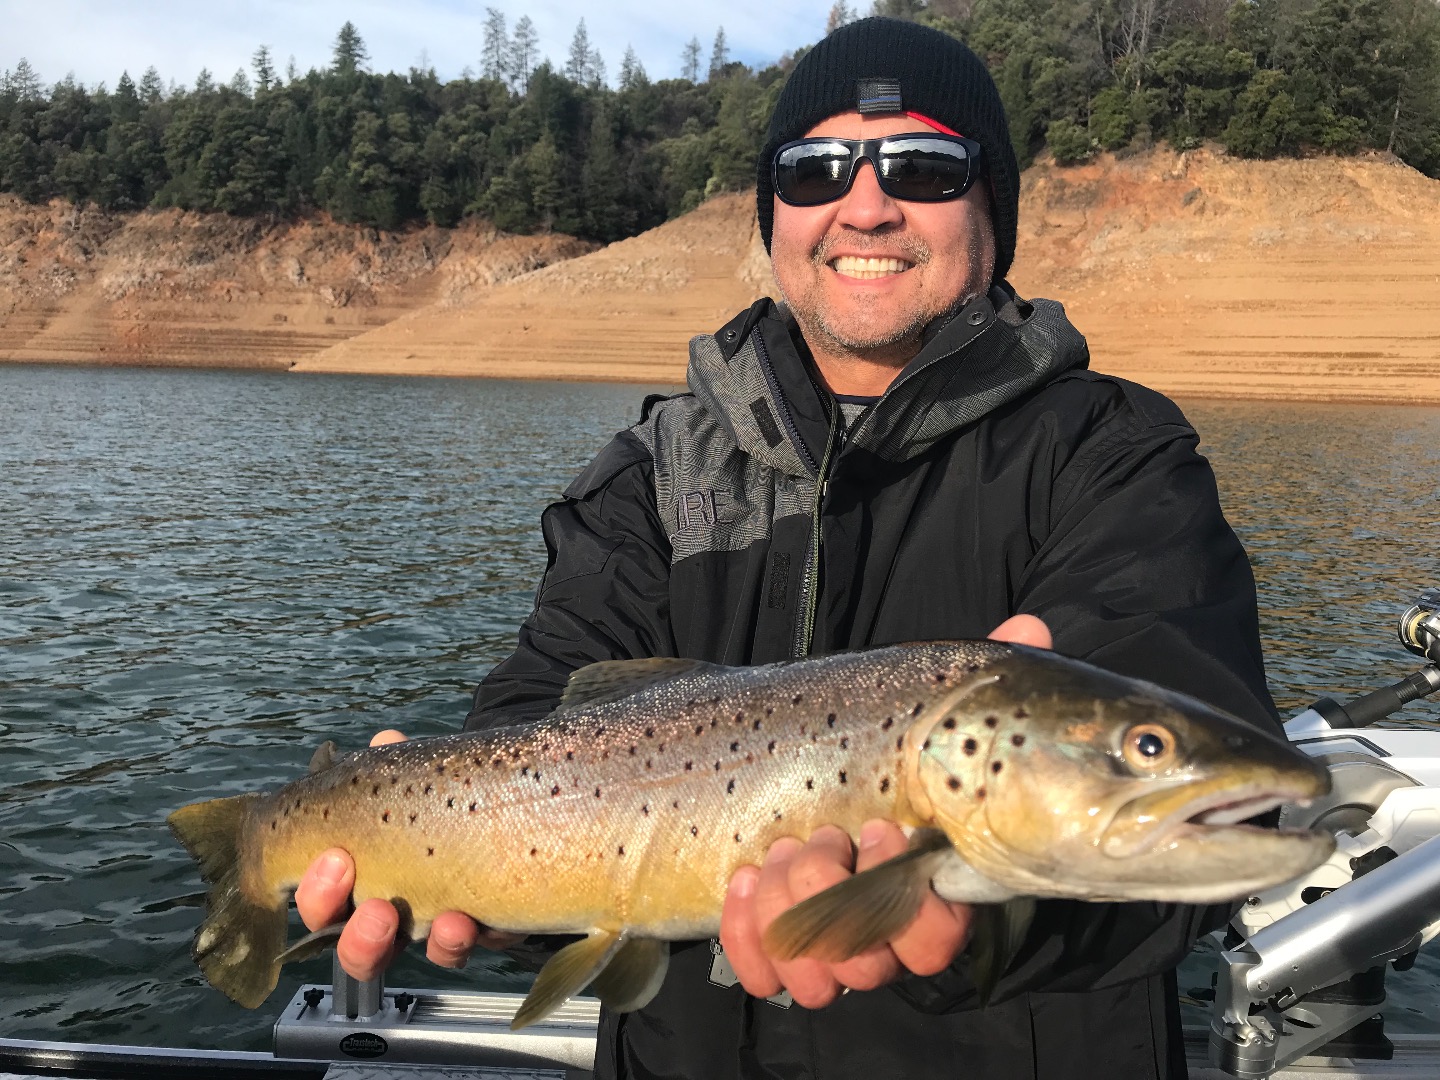 Shasta Lake trout are staging in the lake arms.